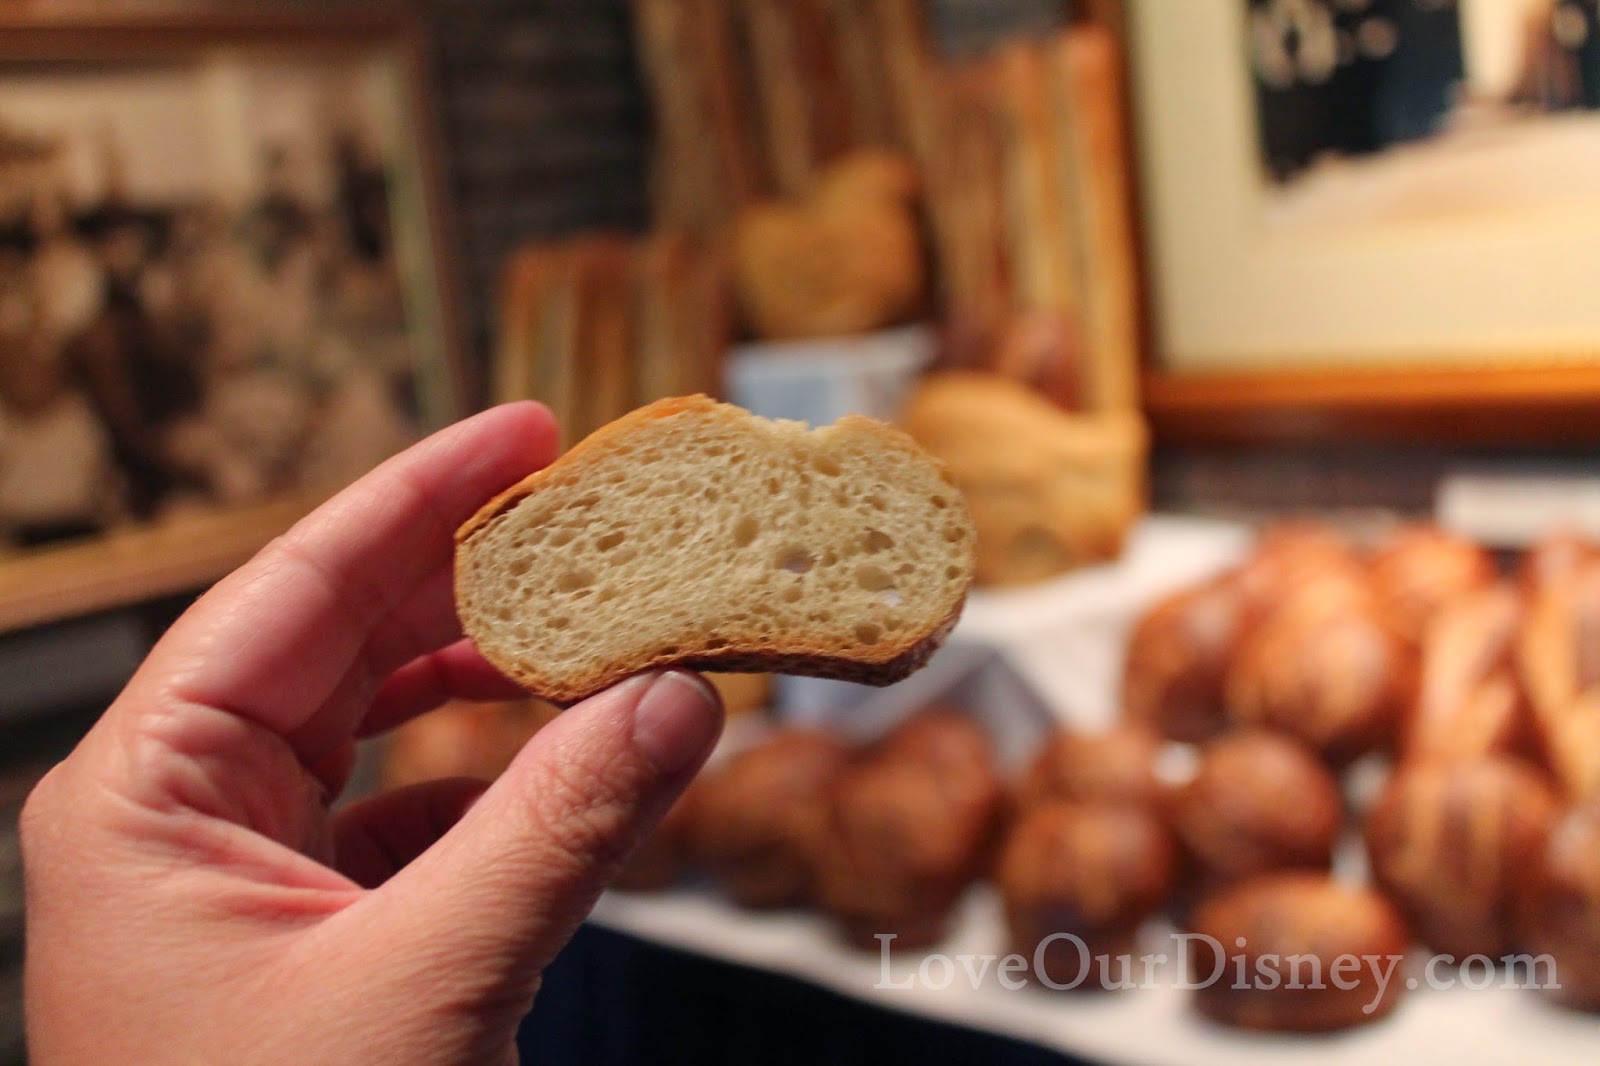 Free bread at Disneyland? Sounds too good to be true. LoveOurDisney.com is looking to see what you can get for free at the Disneyland Resort.